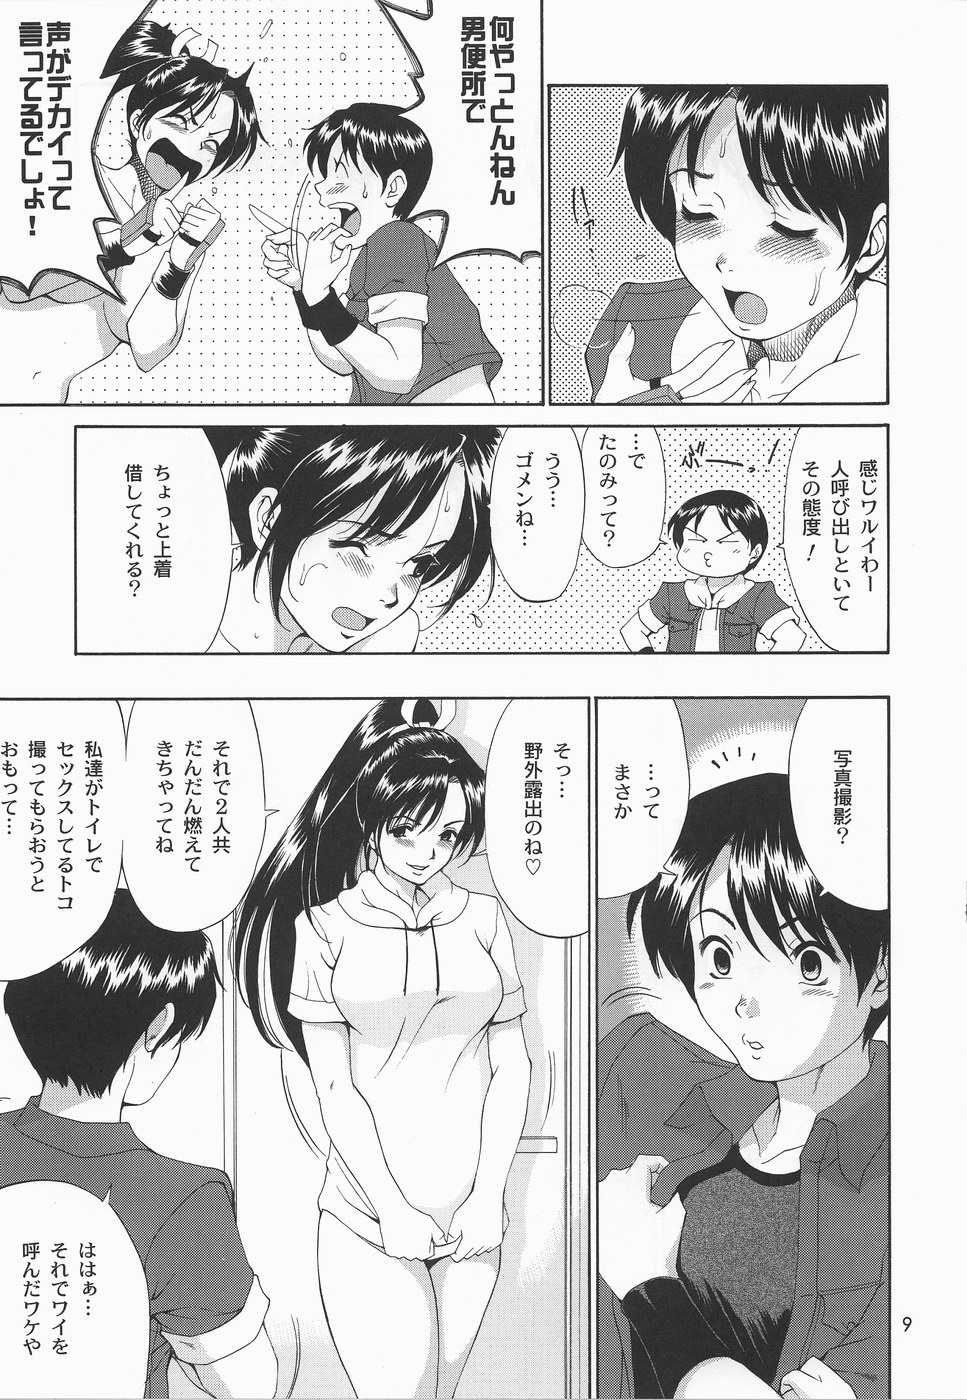 (SC20) [Saigado] Yuri & Friends Mai Special (King of Fighters) page 8 full